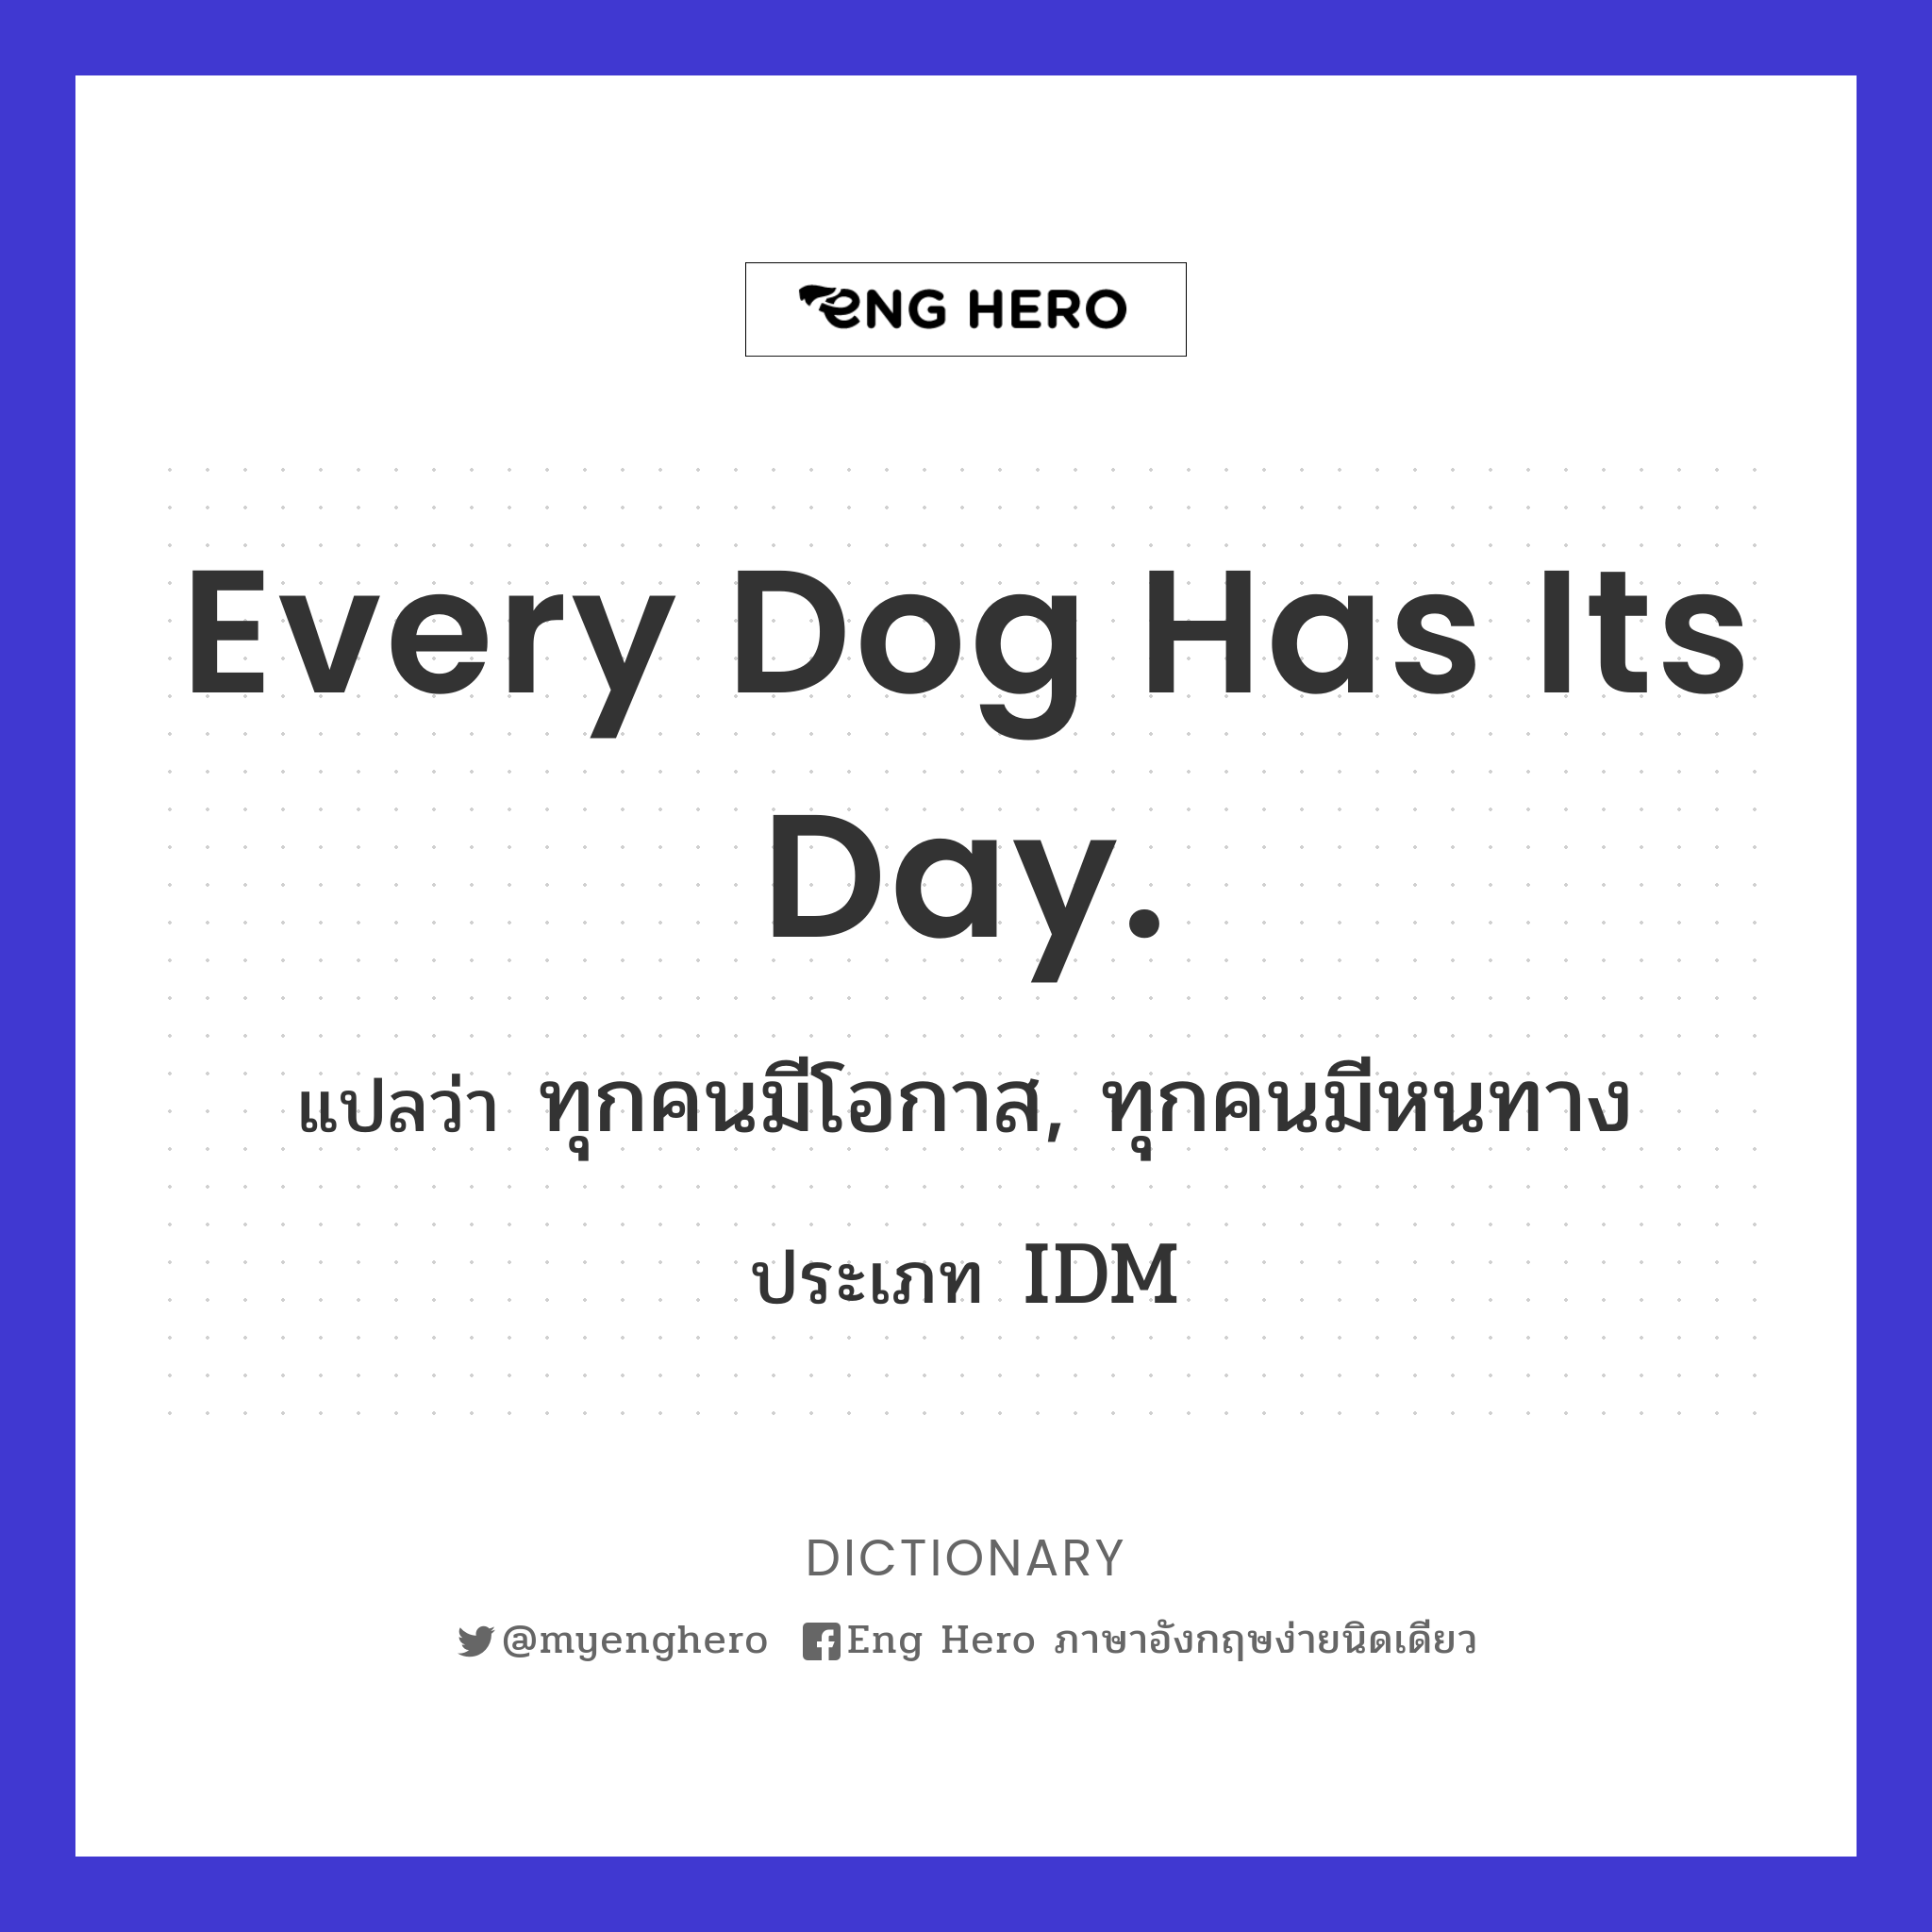 Every dog has its day.